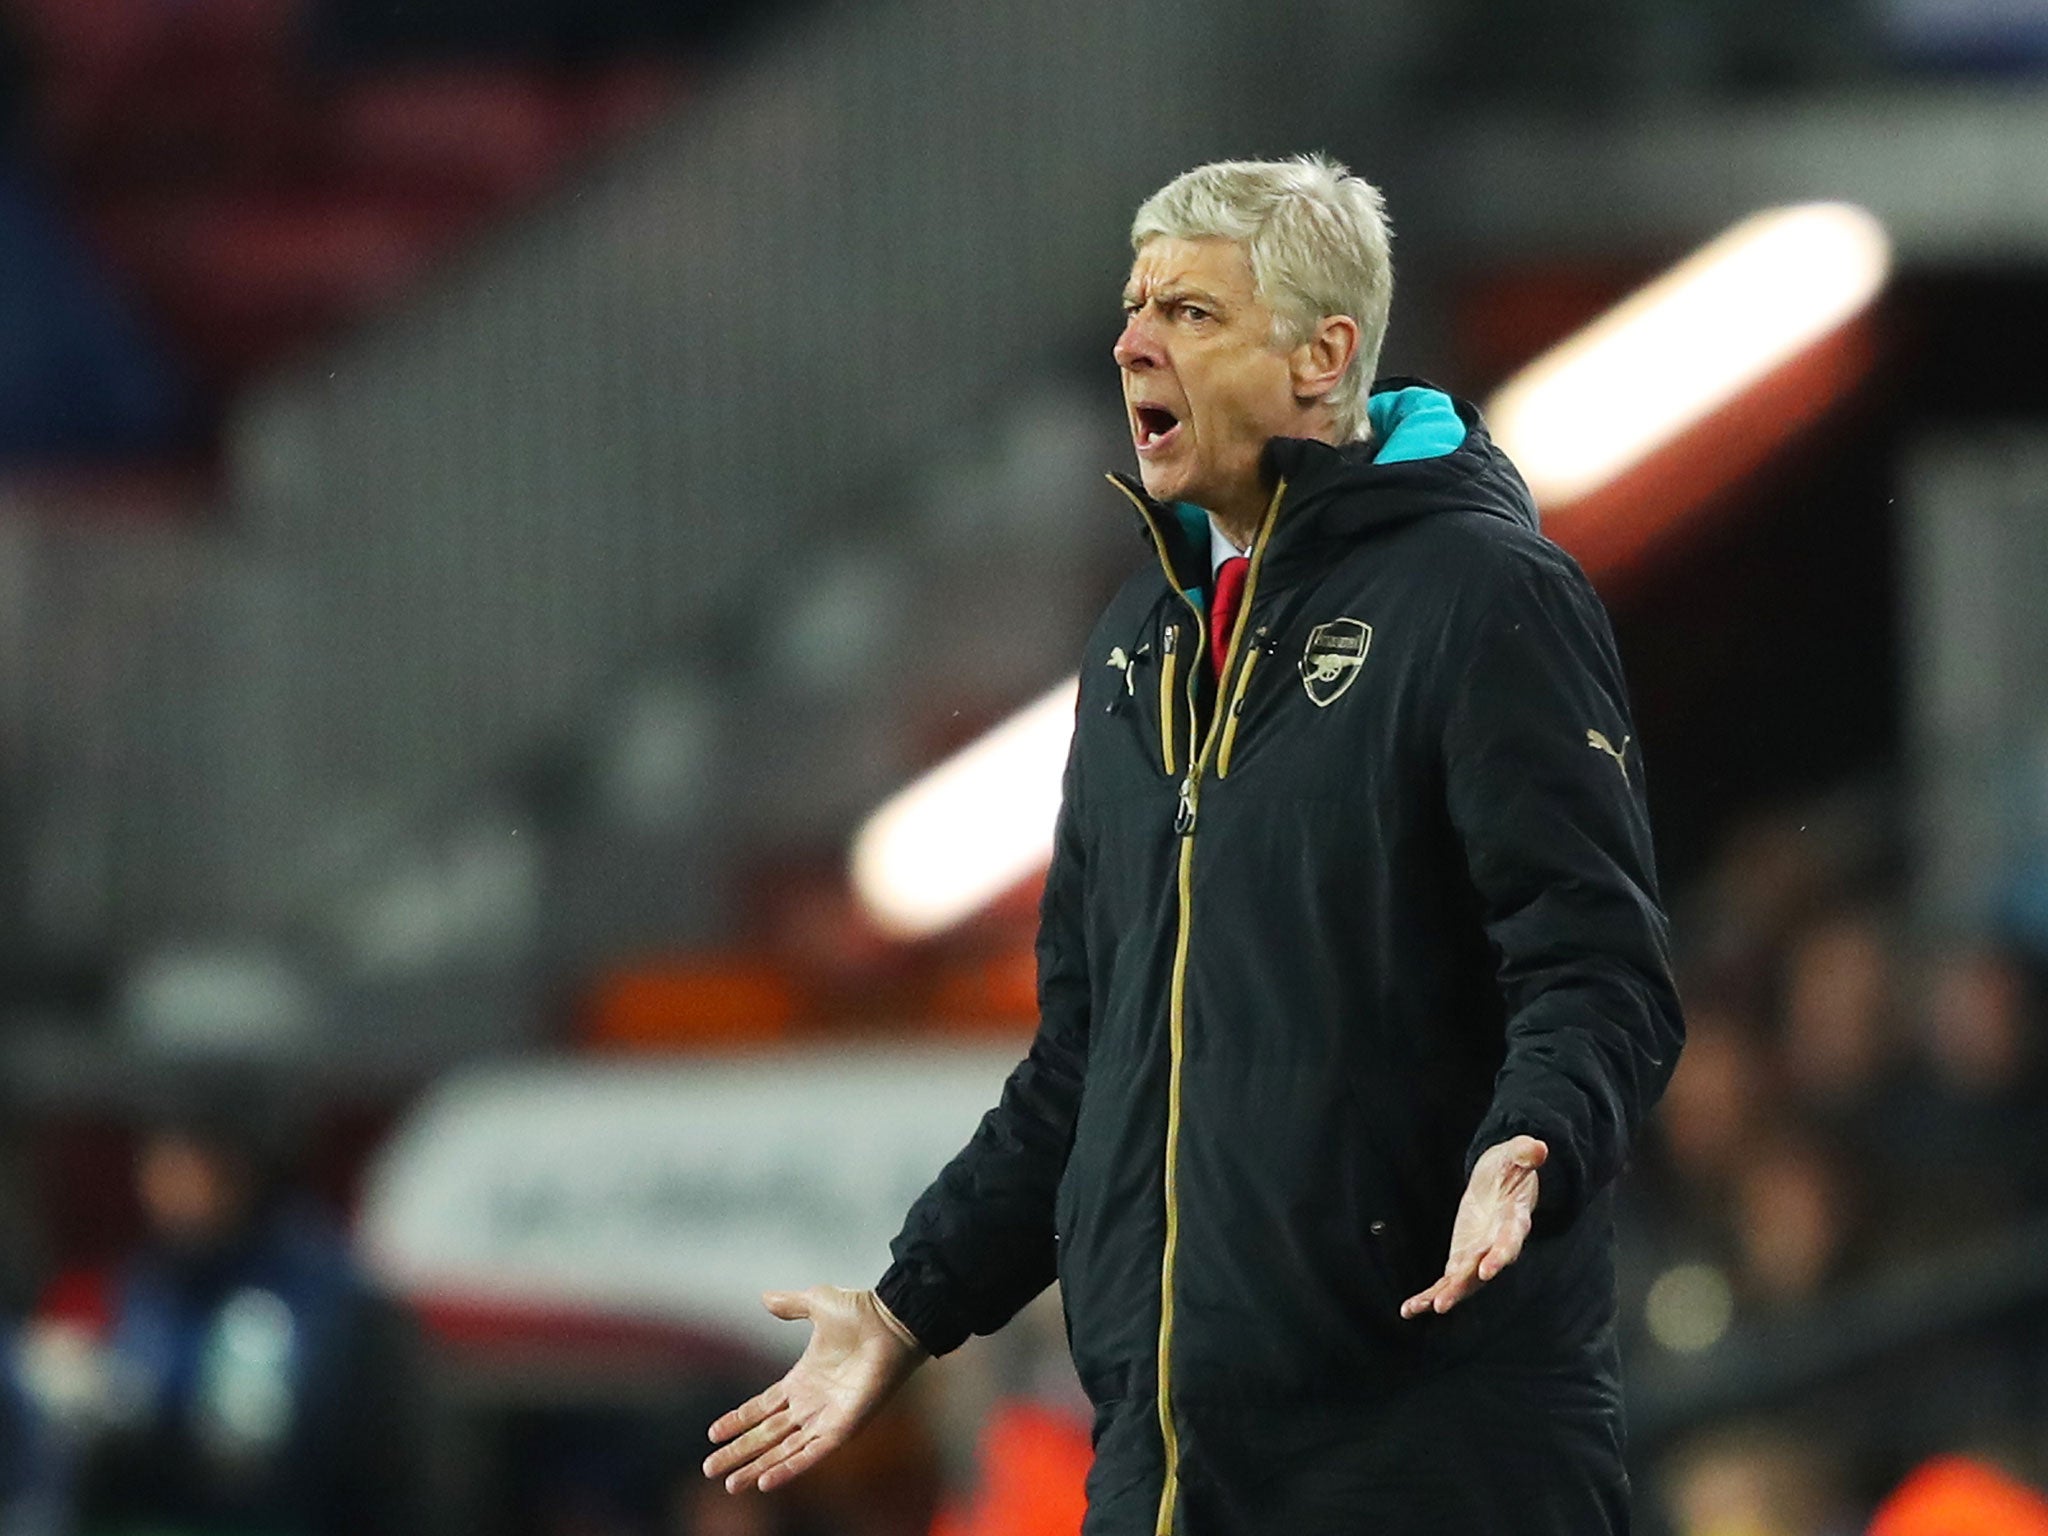 Arsenal manager Arsene Wenger gestures during the 3-1 defeat by Barcelona